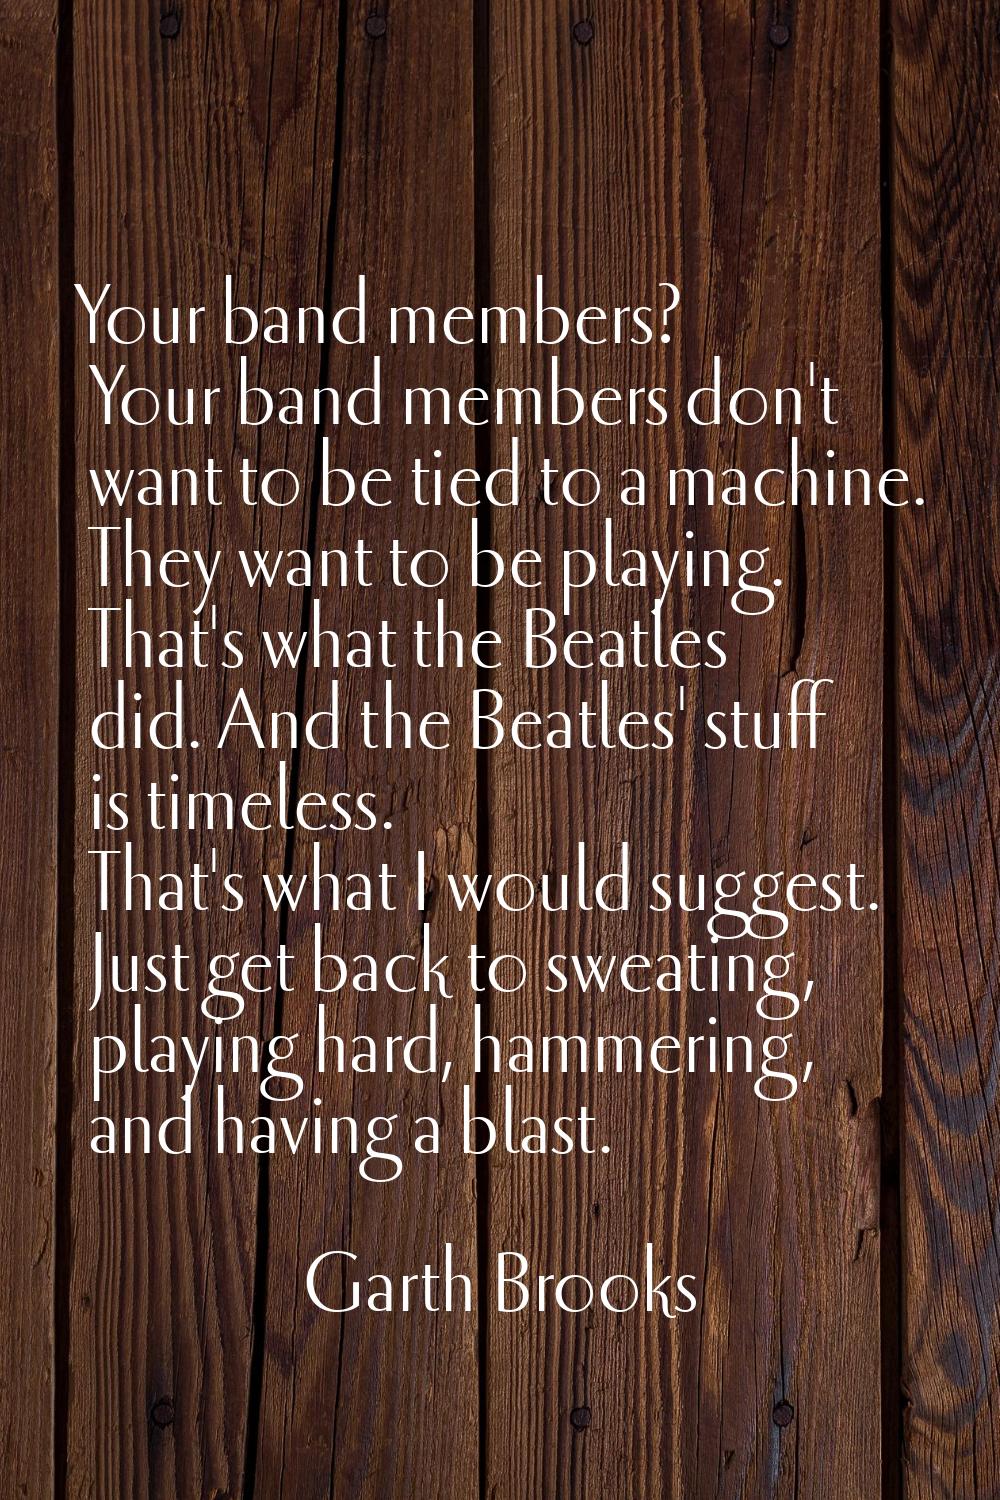 Your band members? Your band members don't want to be tied to a machine. They want to be playing. T